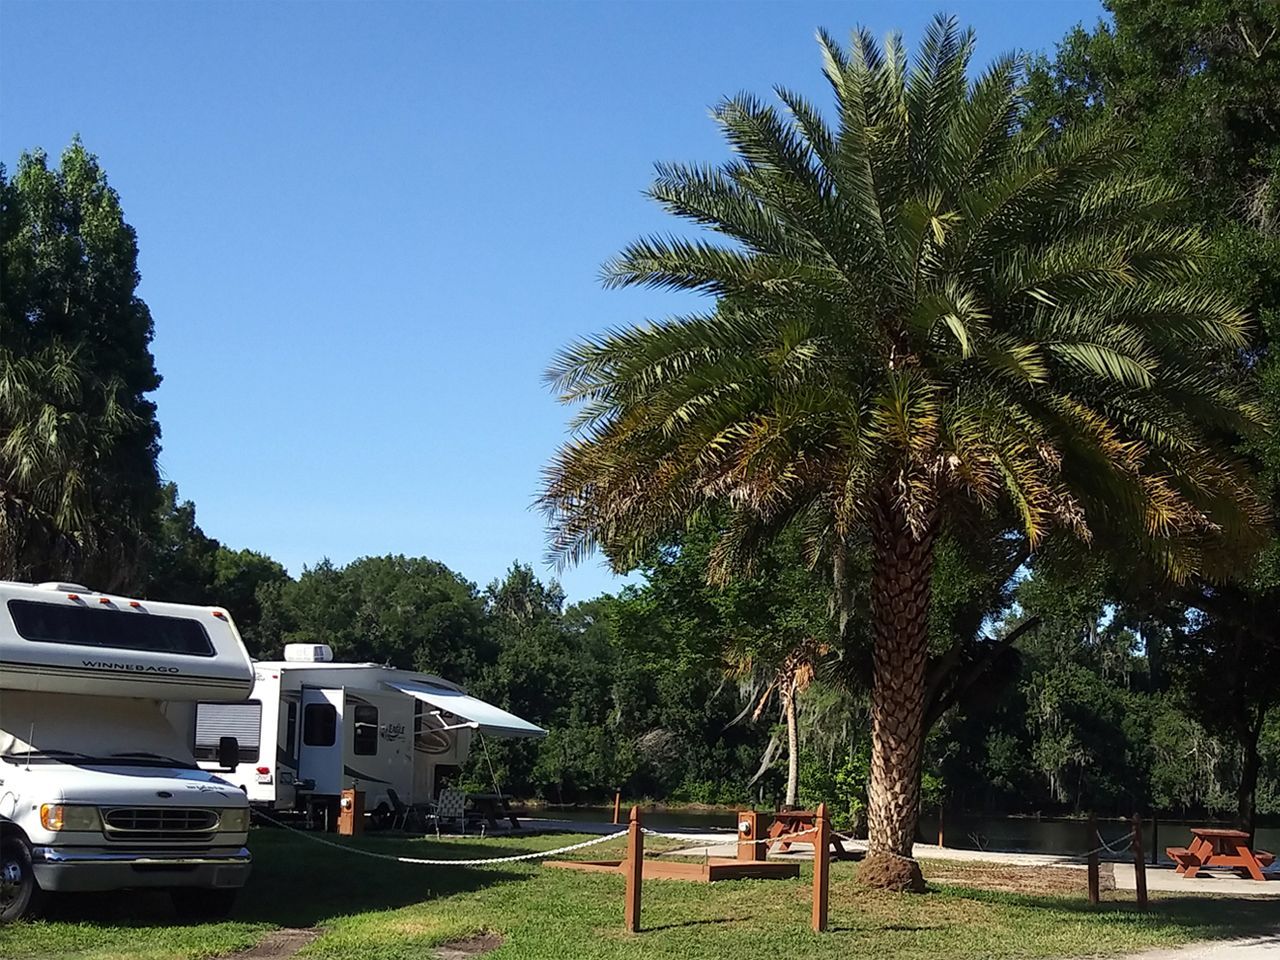 a rv parked in a grassy area with palm trees